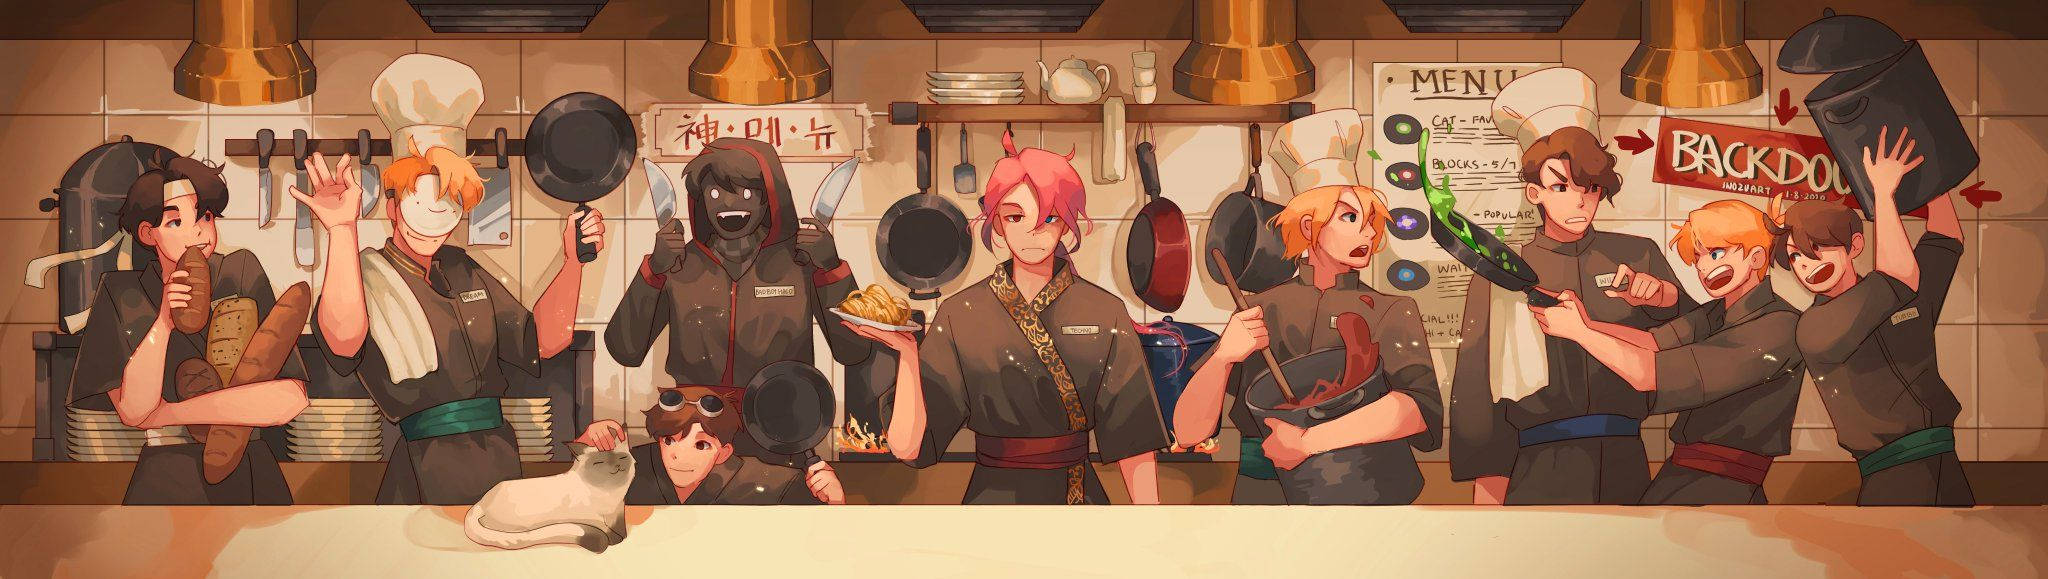 Mcyt Cooking Chefs Background